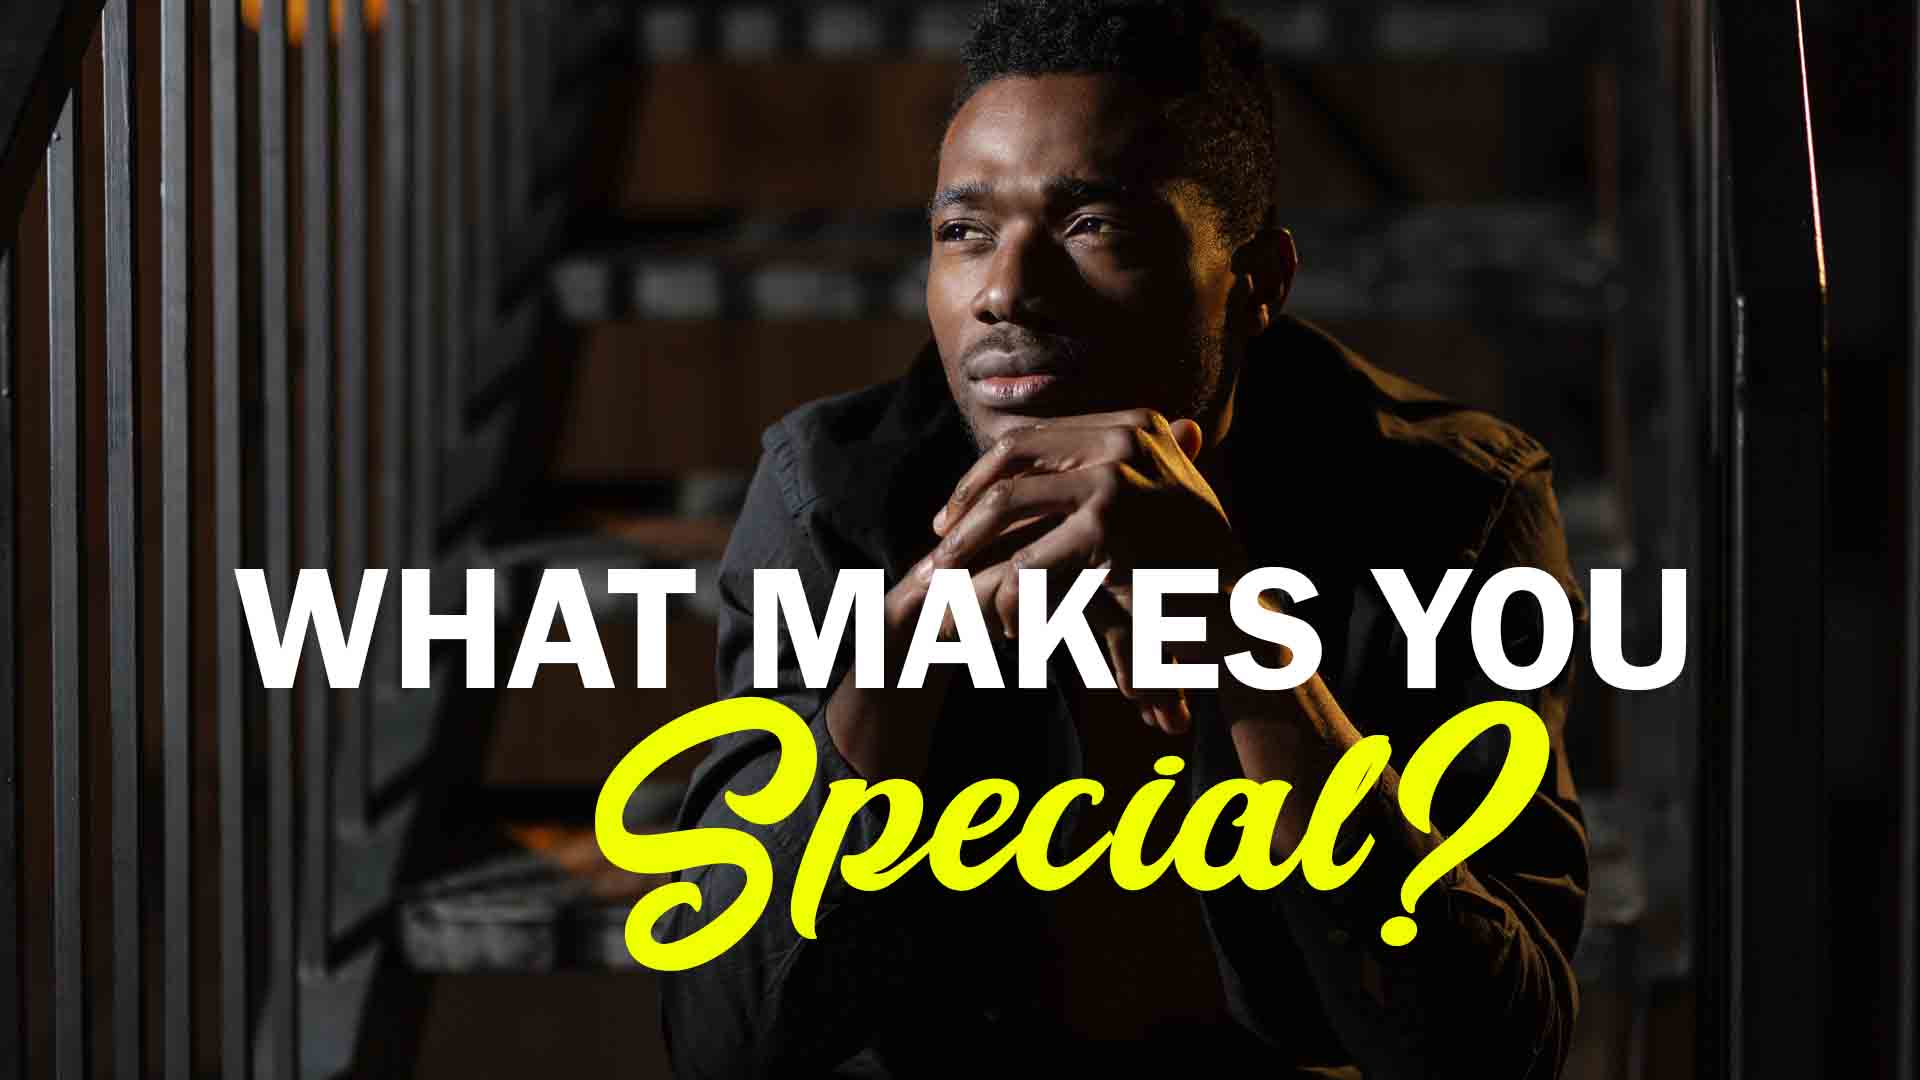 What makes you special?